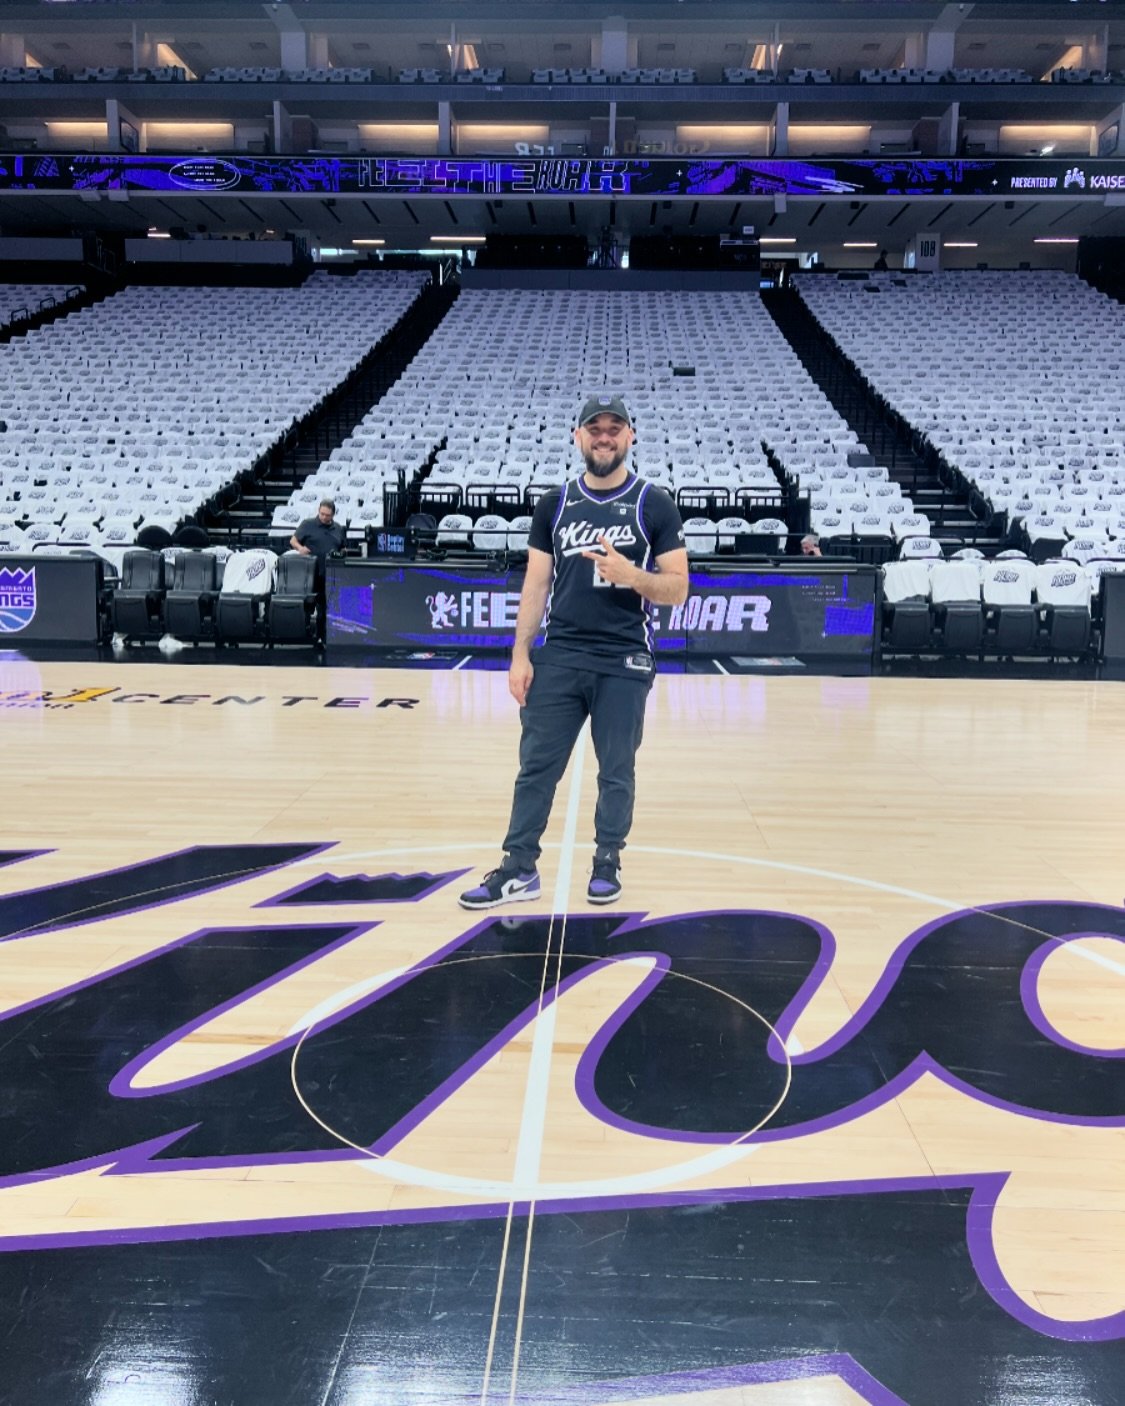 Tonight kings fans I wanna hear you!!!! I&rsquo;ll be djing Kings V Warriors play-in @golden1center Stop by the dj booth and say hello!

📸 @cshoephoto